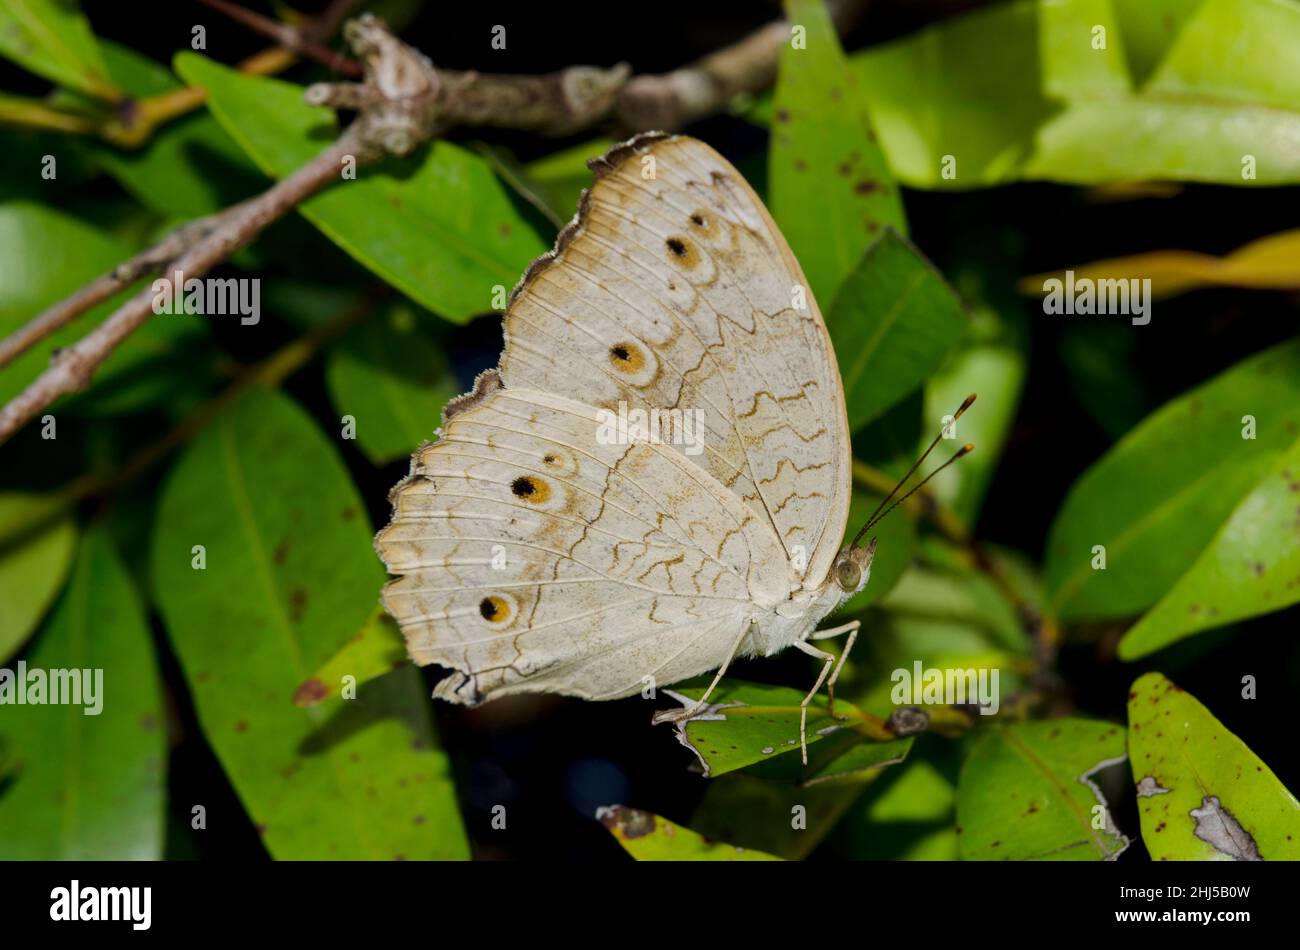 Grey Pansy Butterfly, Junonia atlites, on leaves, Pering, Gianyar, Bali, Indonesia Stock Photo